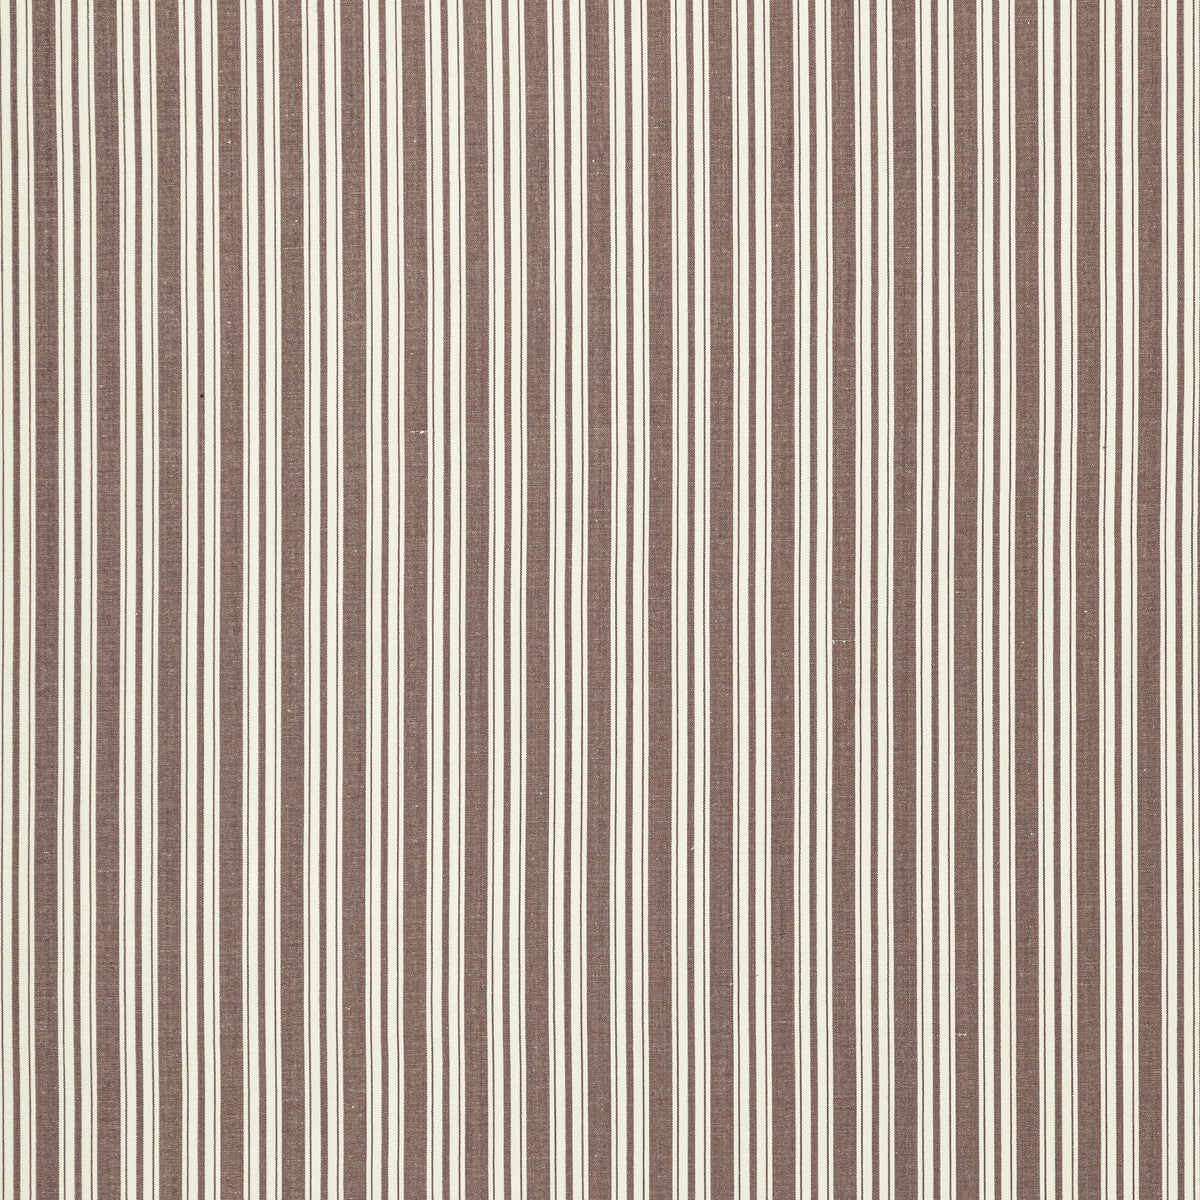 Selune Stripe fabric in brown color - pattern 8022118.6.0 - by Brunschwig &amp; Fils in the Normant Checks And Stripes II collection